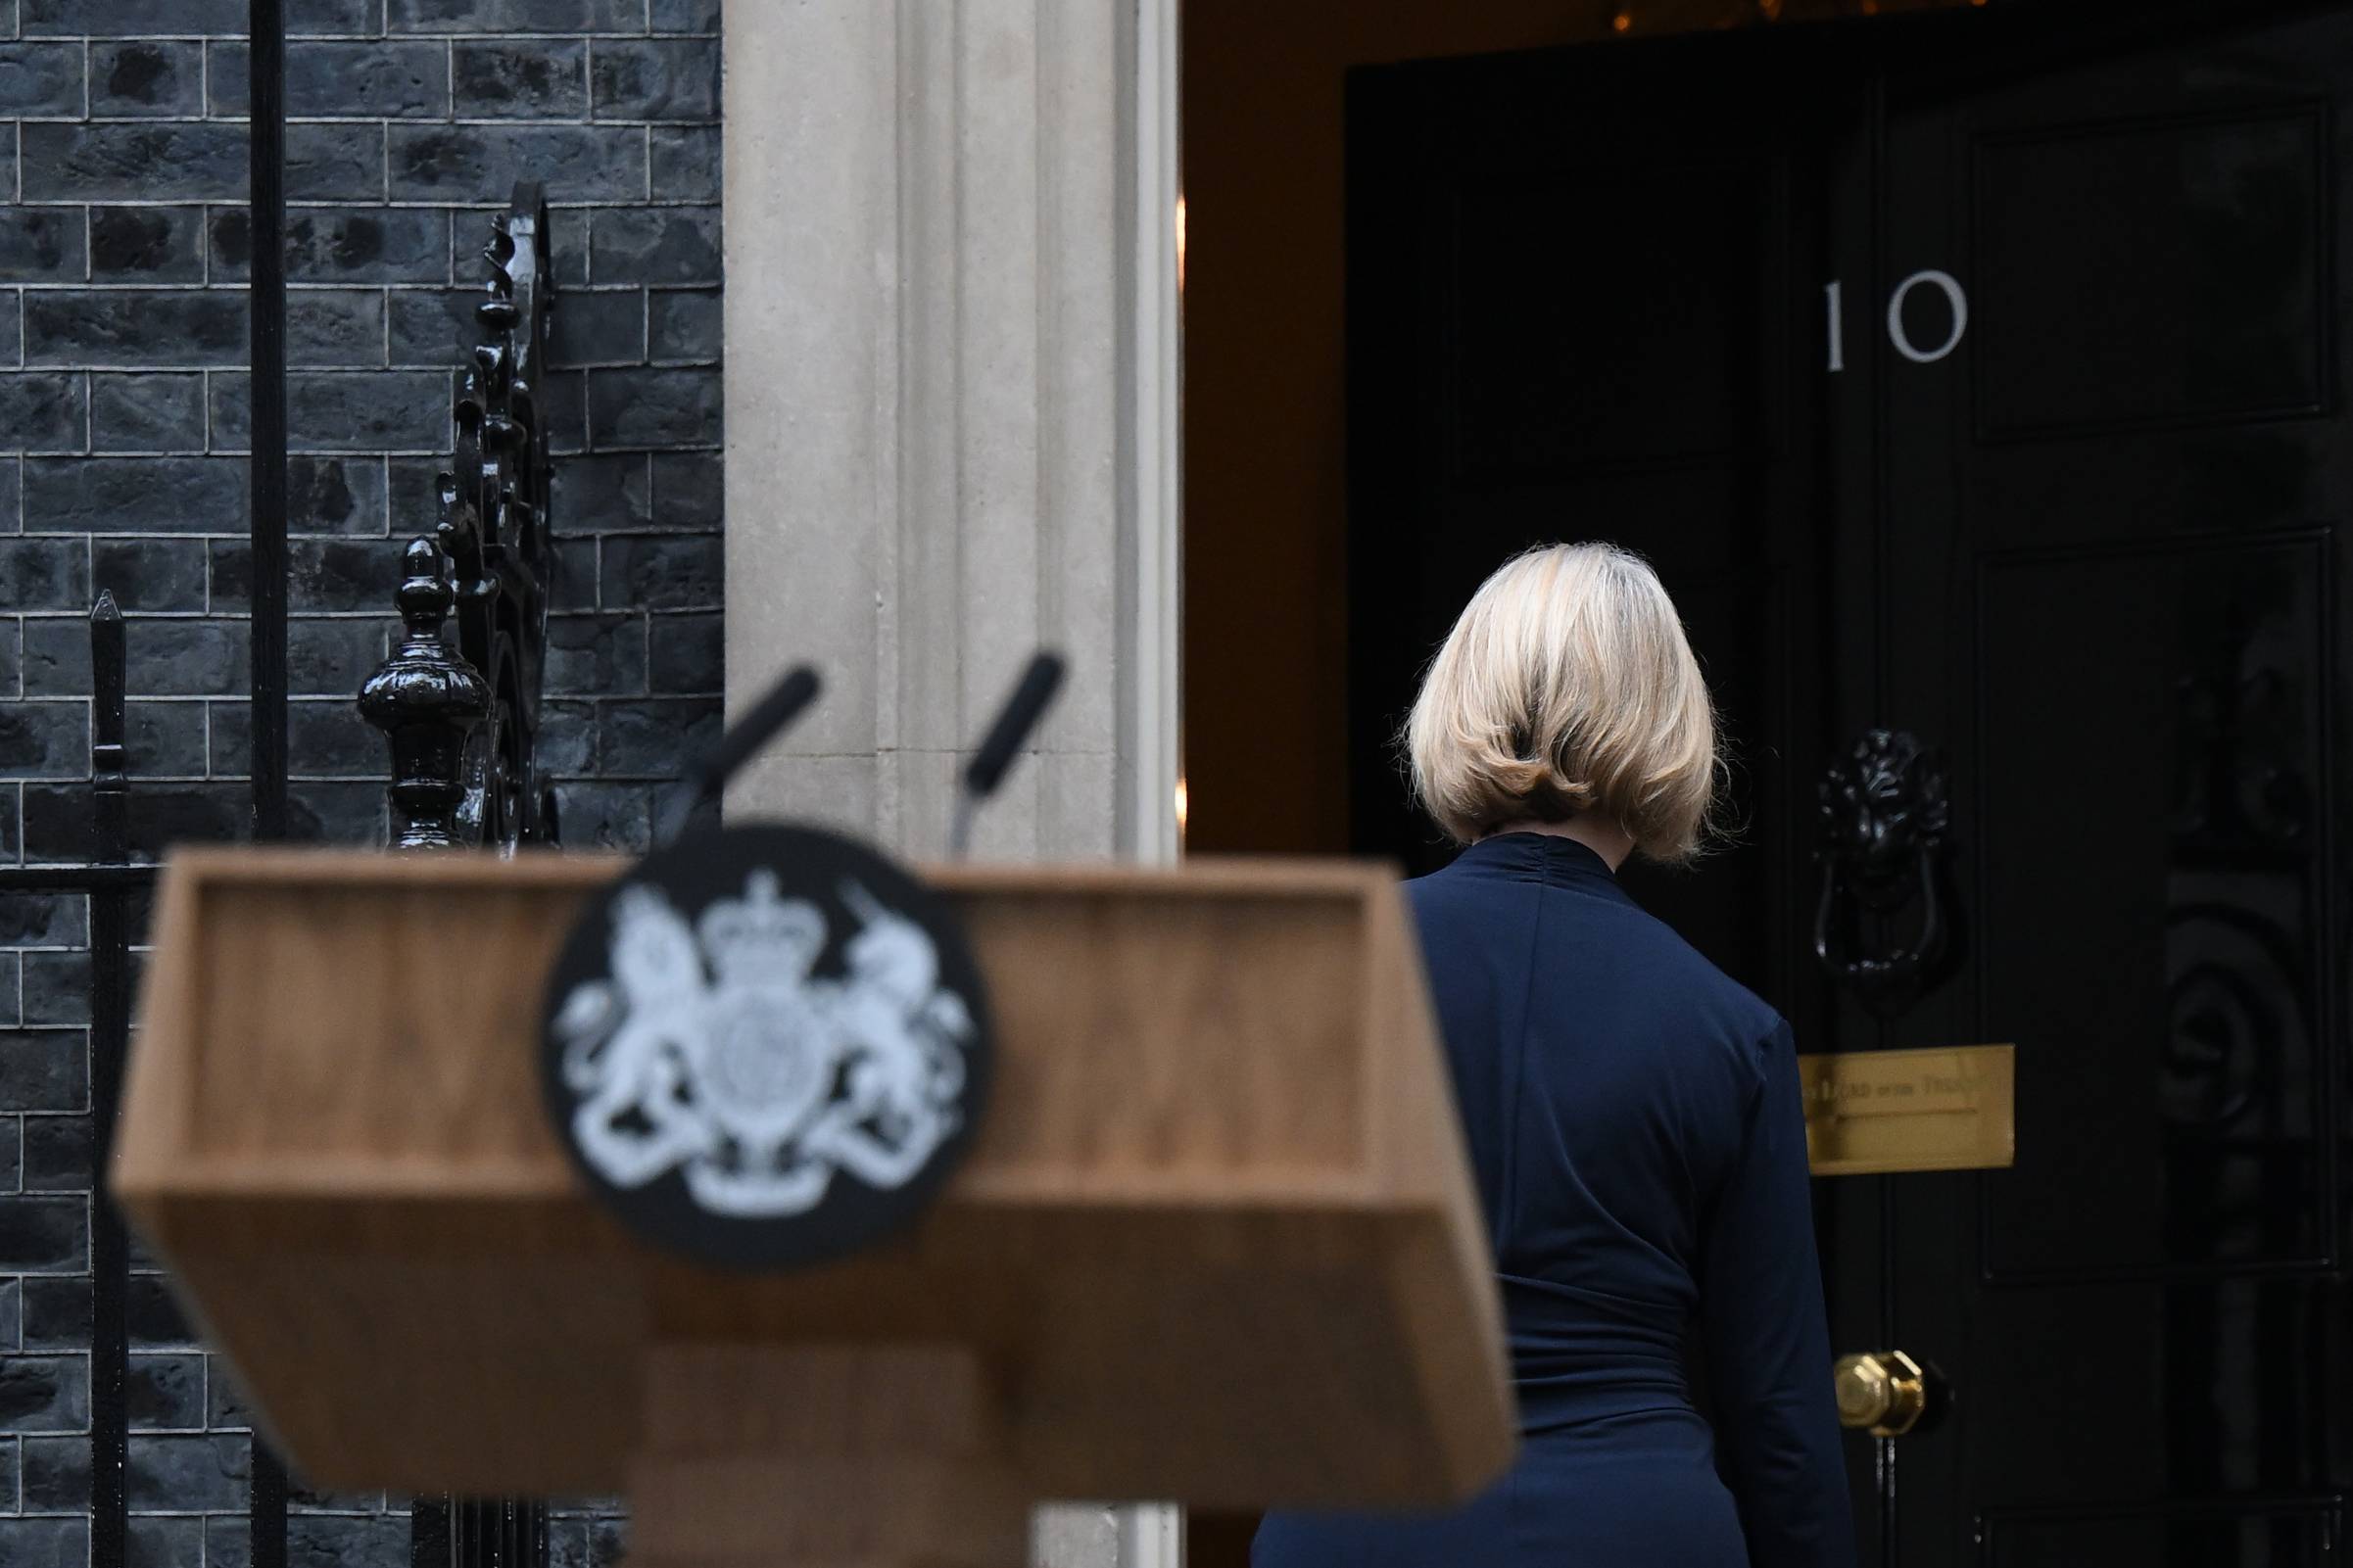 Britain's Prime Minister Liz Truss comes back inside 10 Downing Street, in central London, on October 20, 2022 following a statement to announce her resignation. - British Prime Minister Liz Truss announced her resignation on after just six weeks in office that looked like a descent into hell, triggering a new internal election within the Conservative Party. (Photo by Daniel LEAL / AFP)